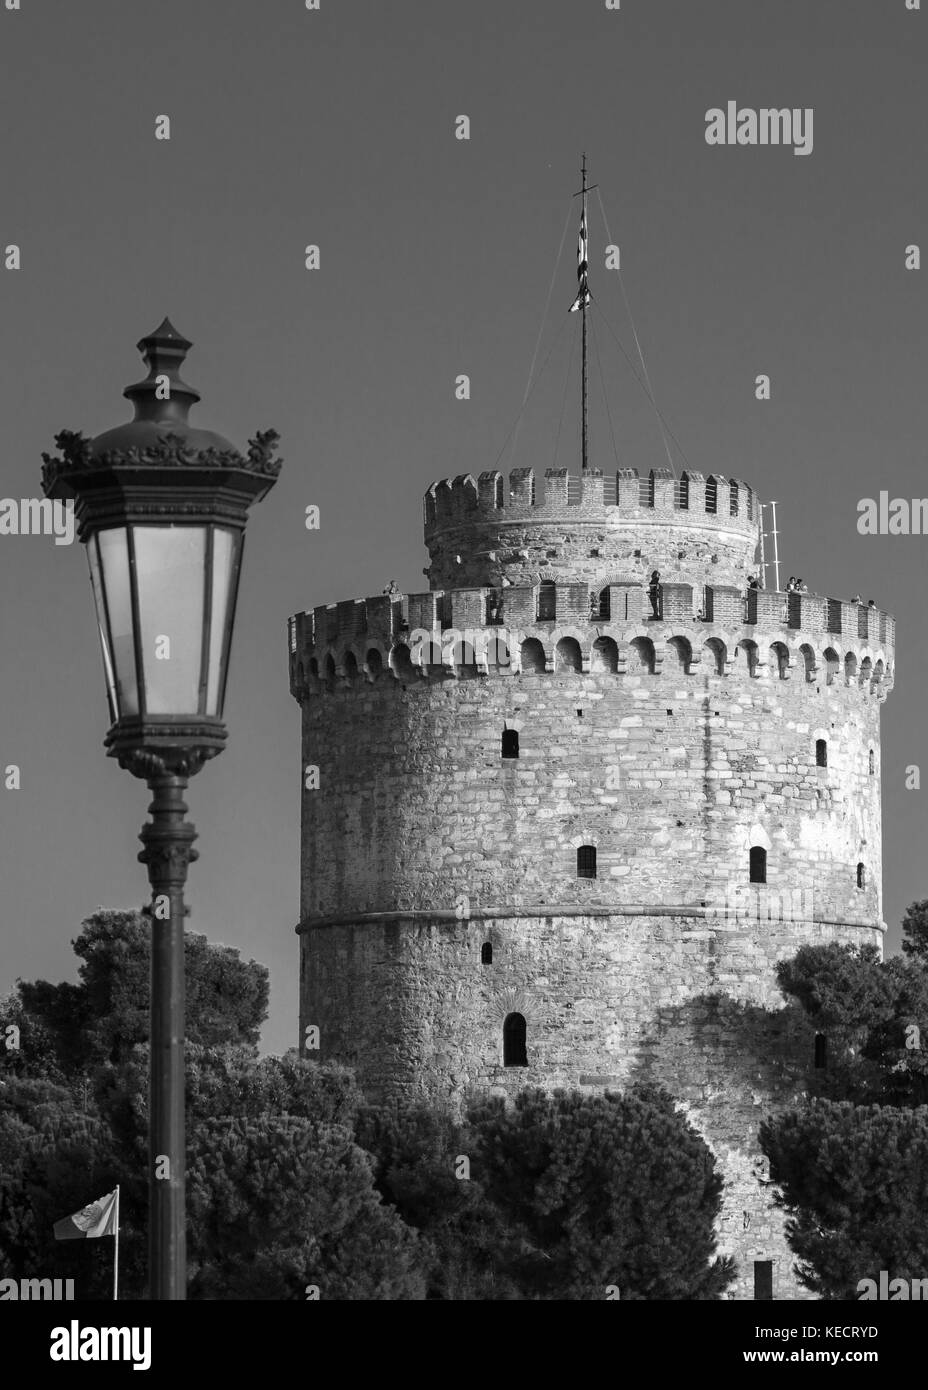 b&w one urban metal lantern with one lamp just against a clear sky and the main city attractions of the white tower, Greece, Thessaloniki Stock Photo